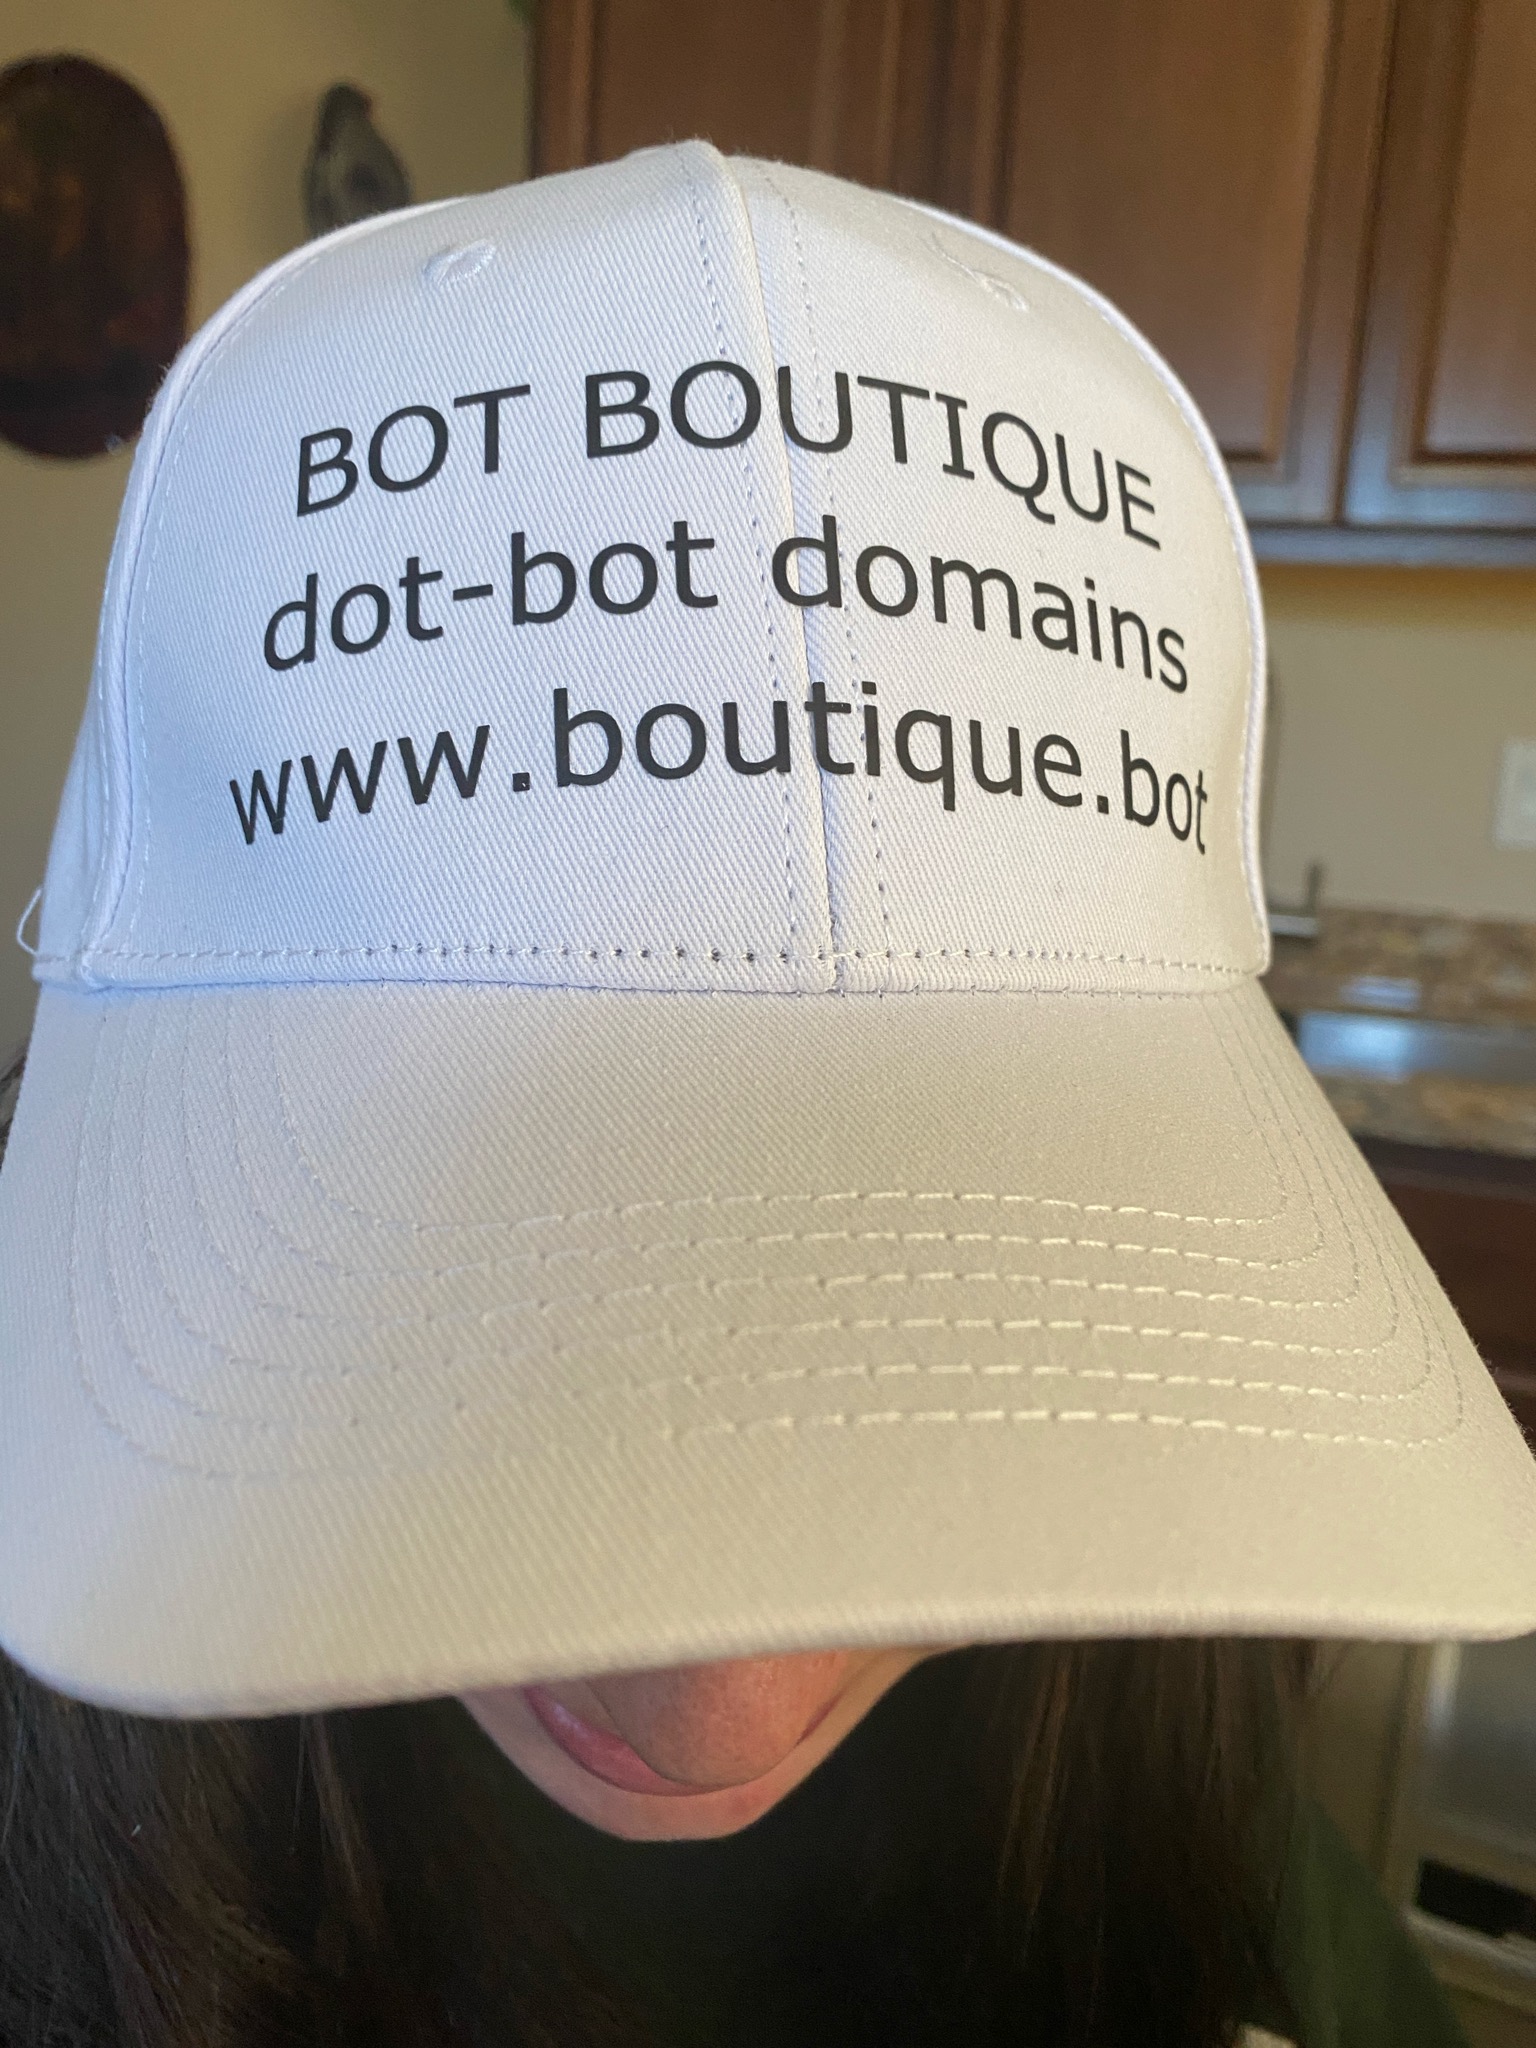 Boutique.bot name makes me smile. Go-Here to see all boutique types